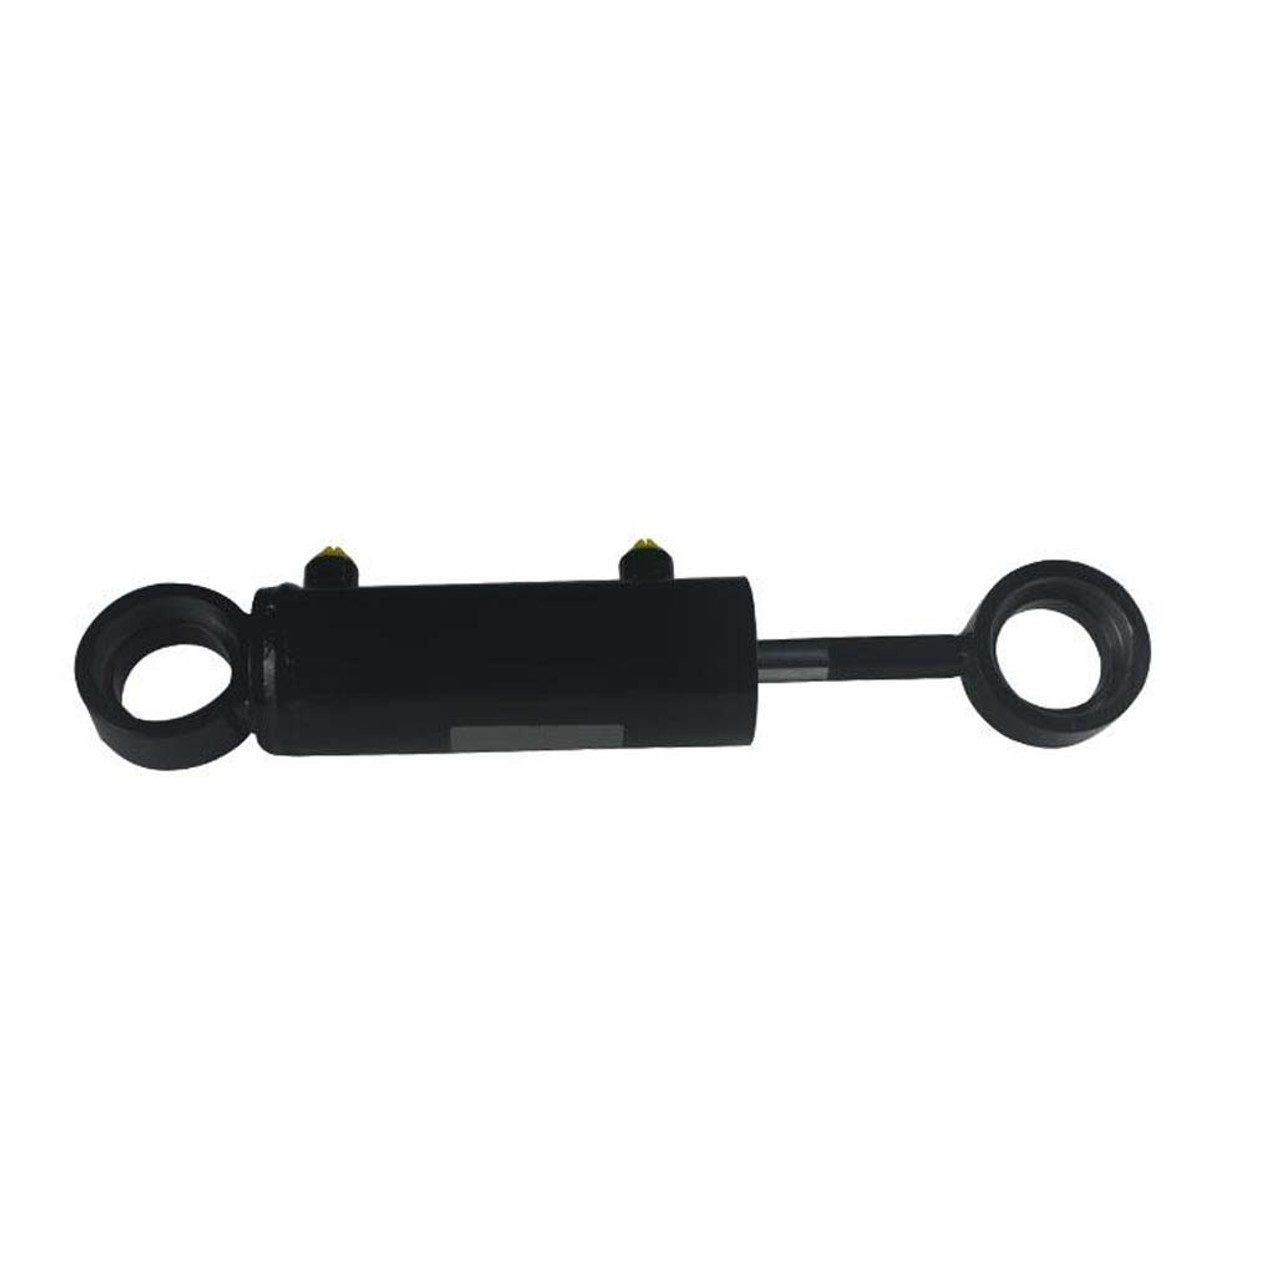 New Steering Cylinder Assembly - Replaces Toro 121-7835